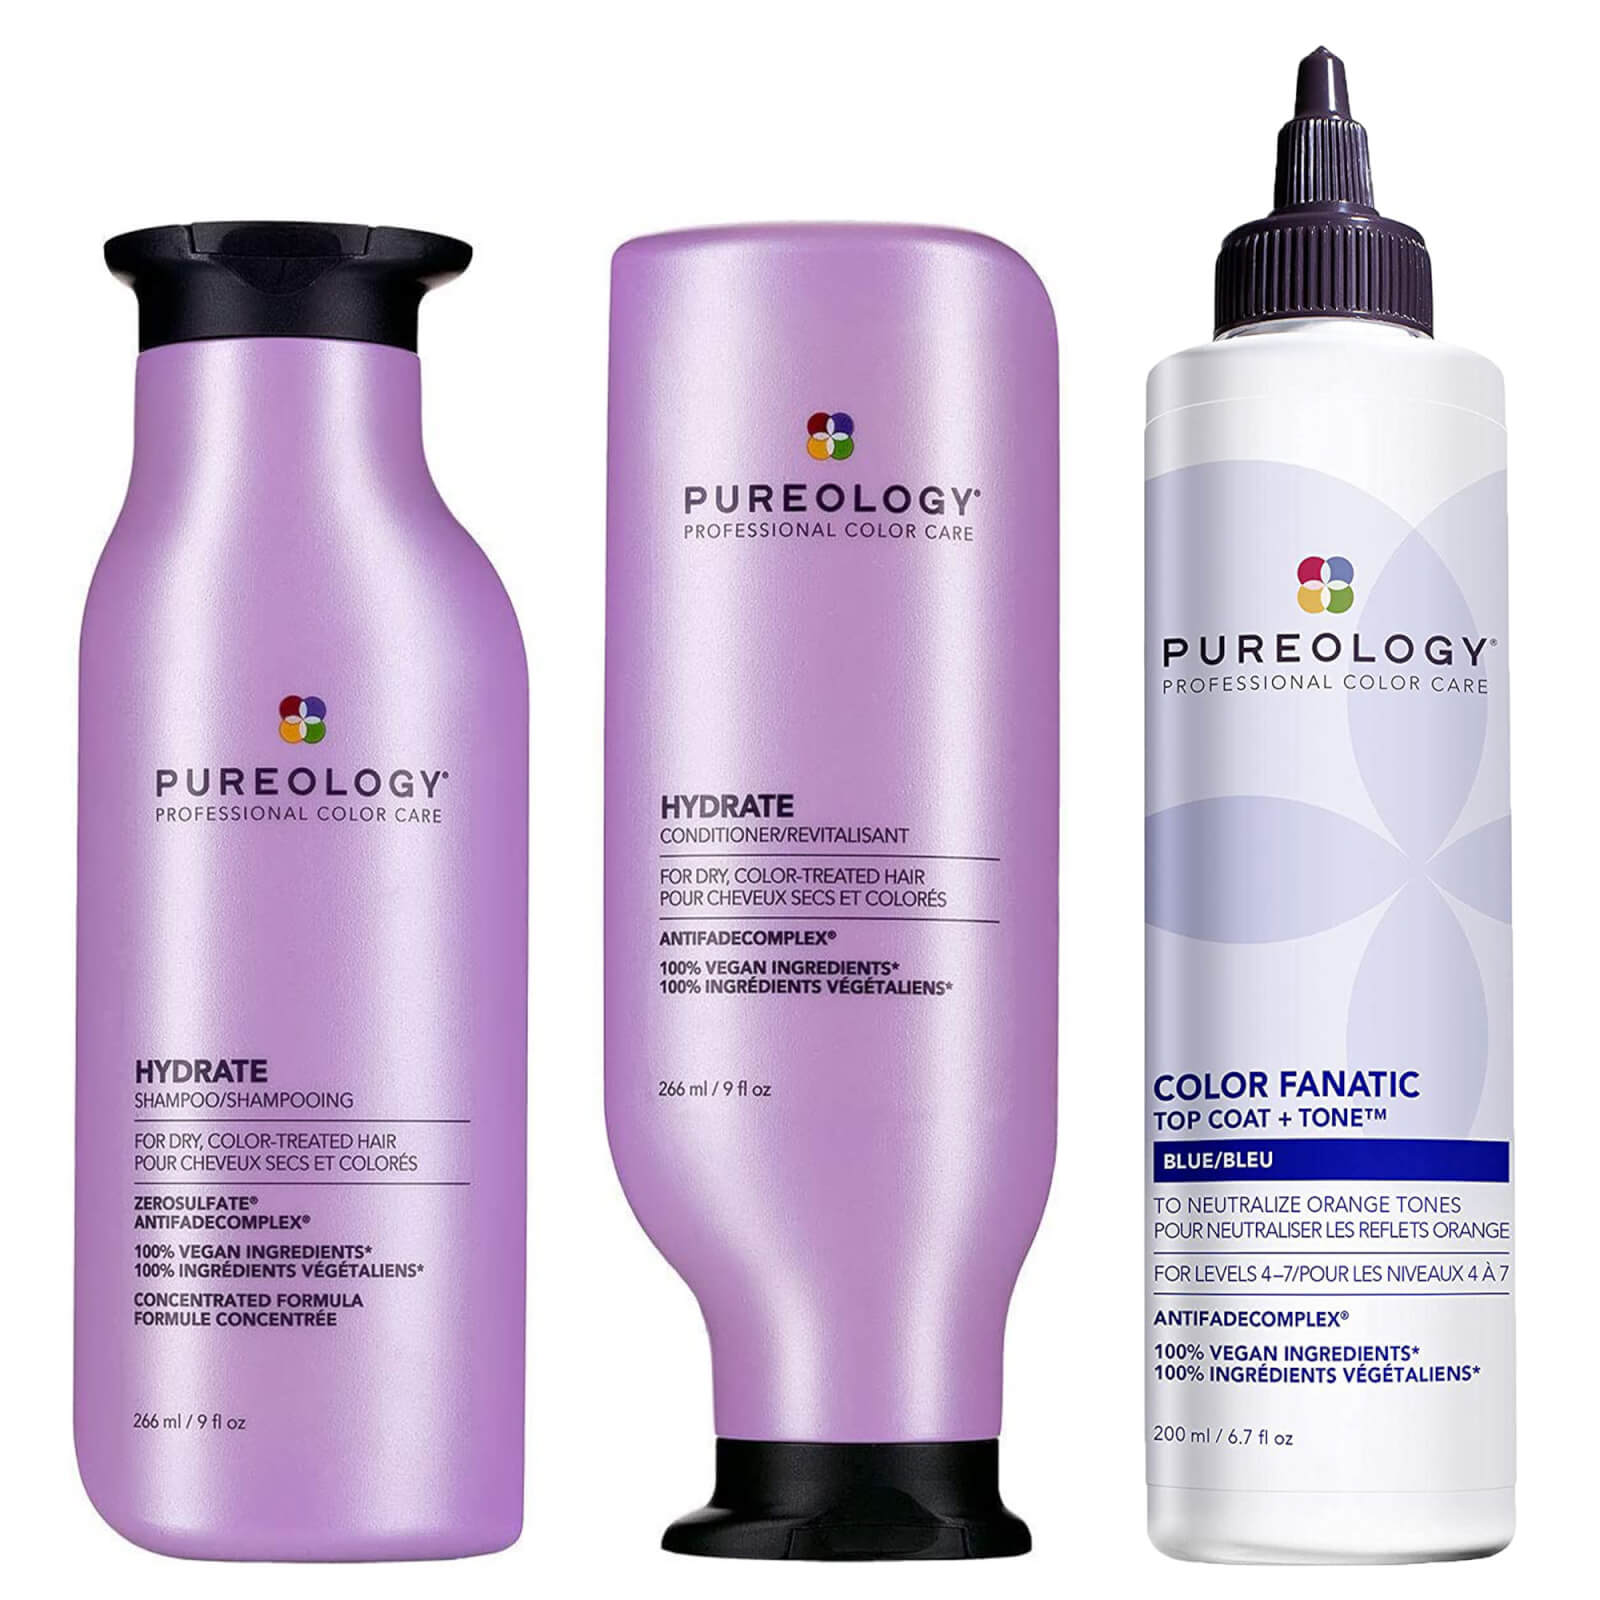 Pureology Hydrate Shampoo, Conditioner and Color Fanatic Blue Toner Routine for Neutralising and Hyd